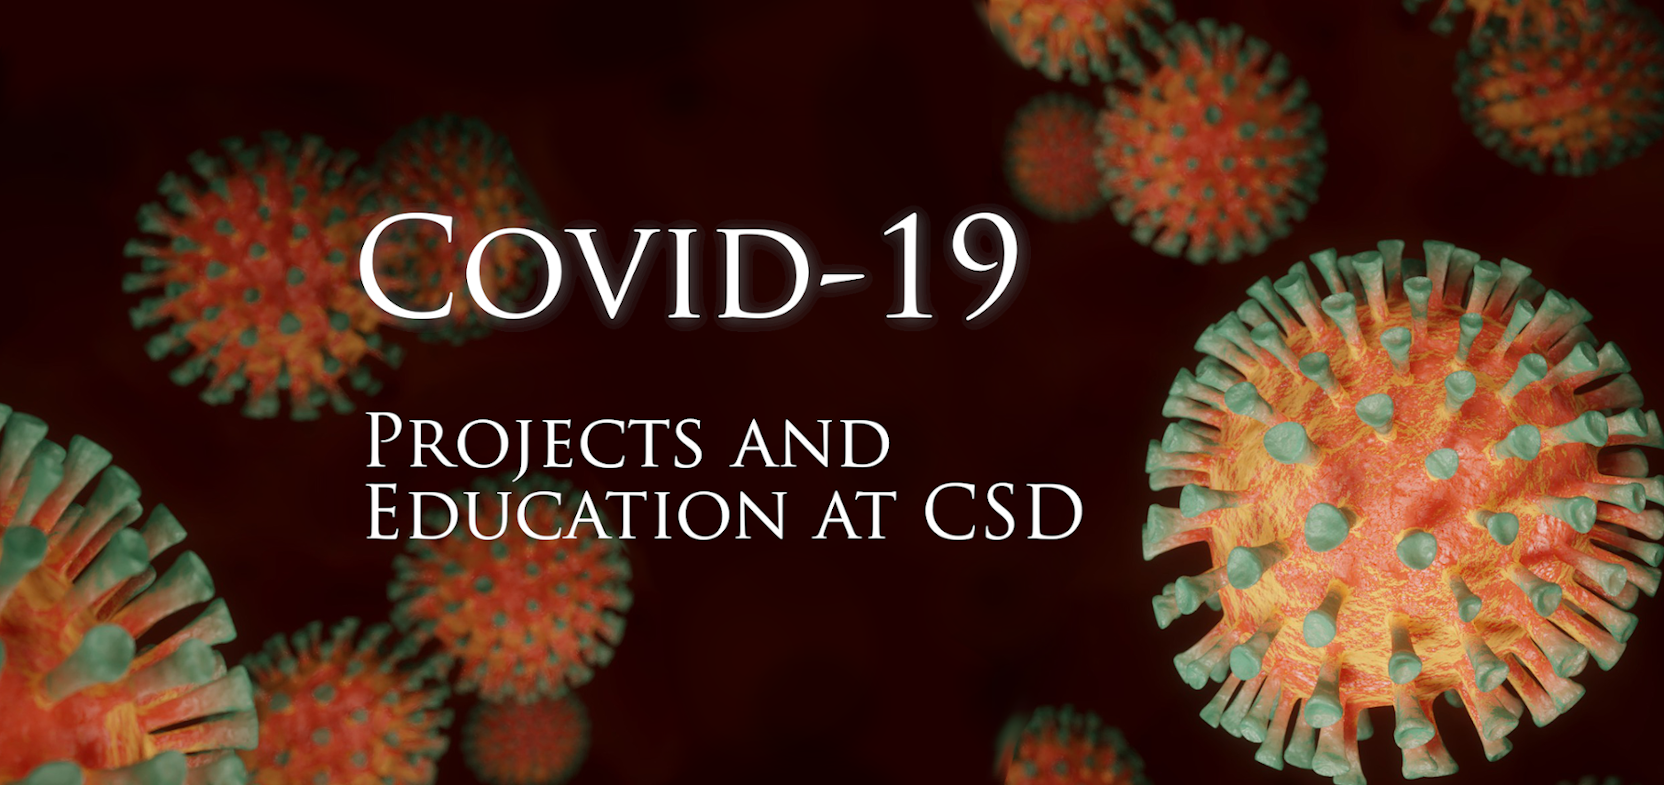 COVID-19 Projects and Education at CSD